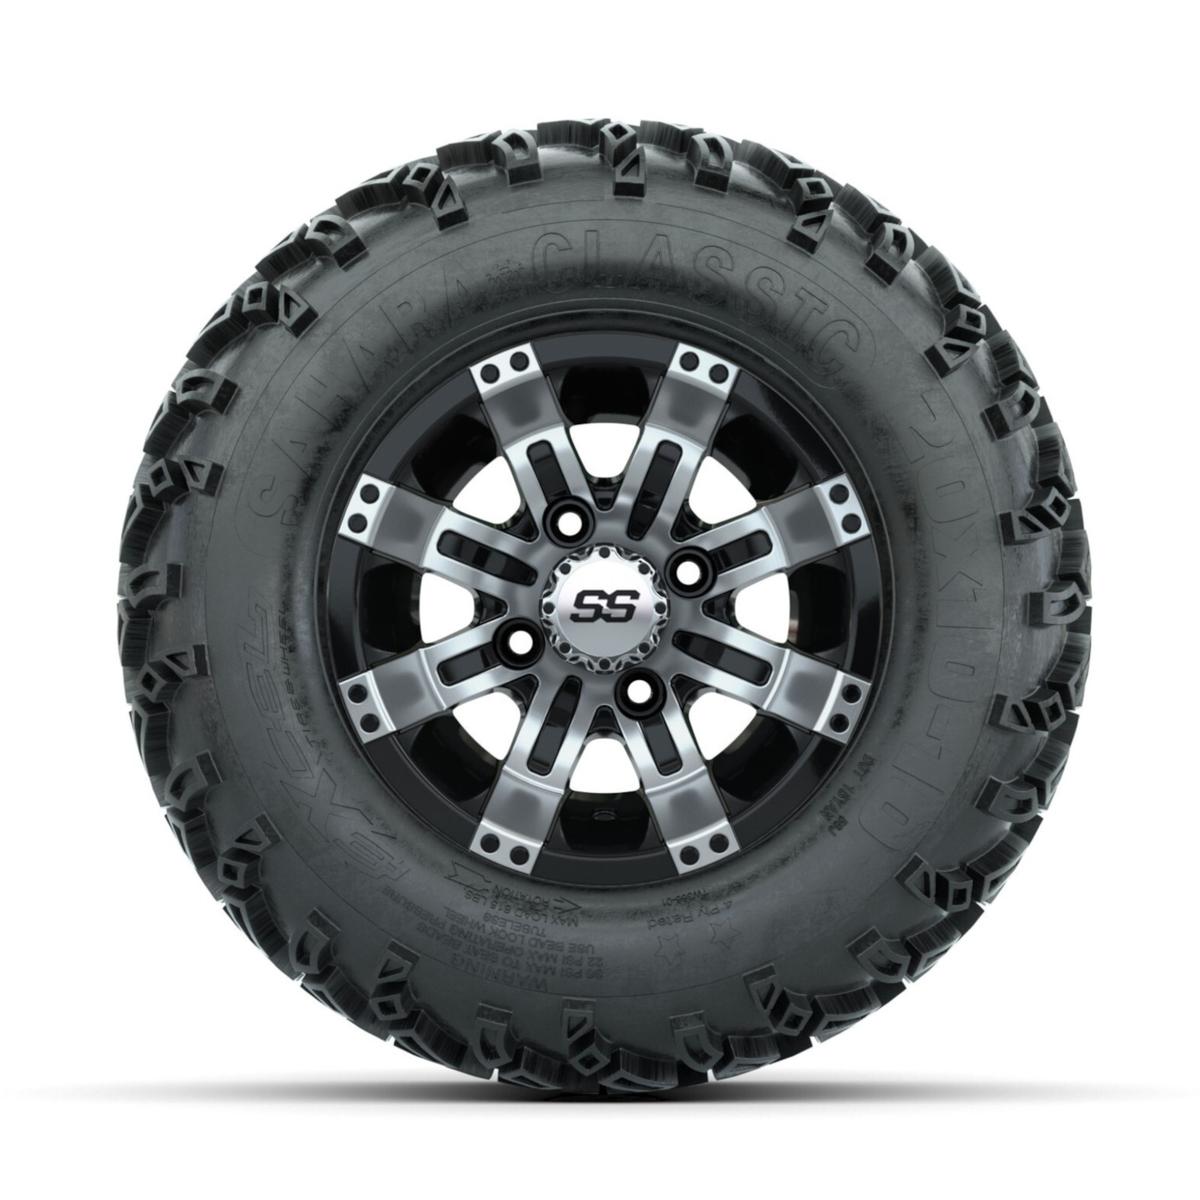 Set of (4) 10 in GTW Tempest Wheels with 20x10-10 Sahara Classic All Terrain Tires